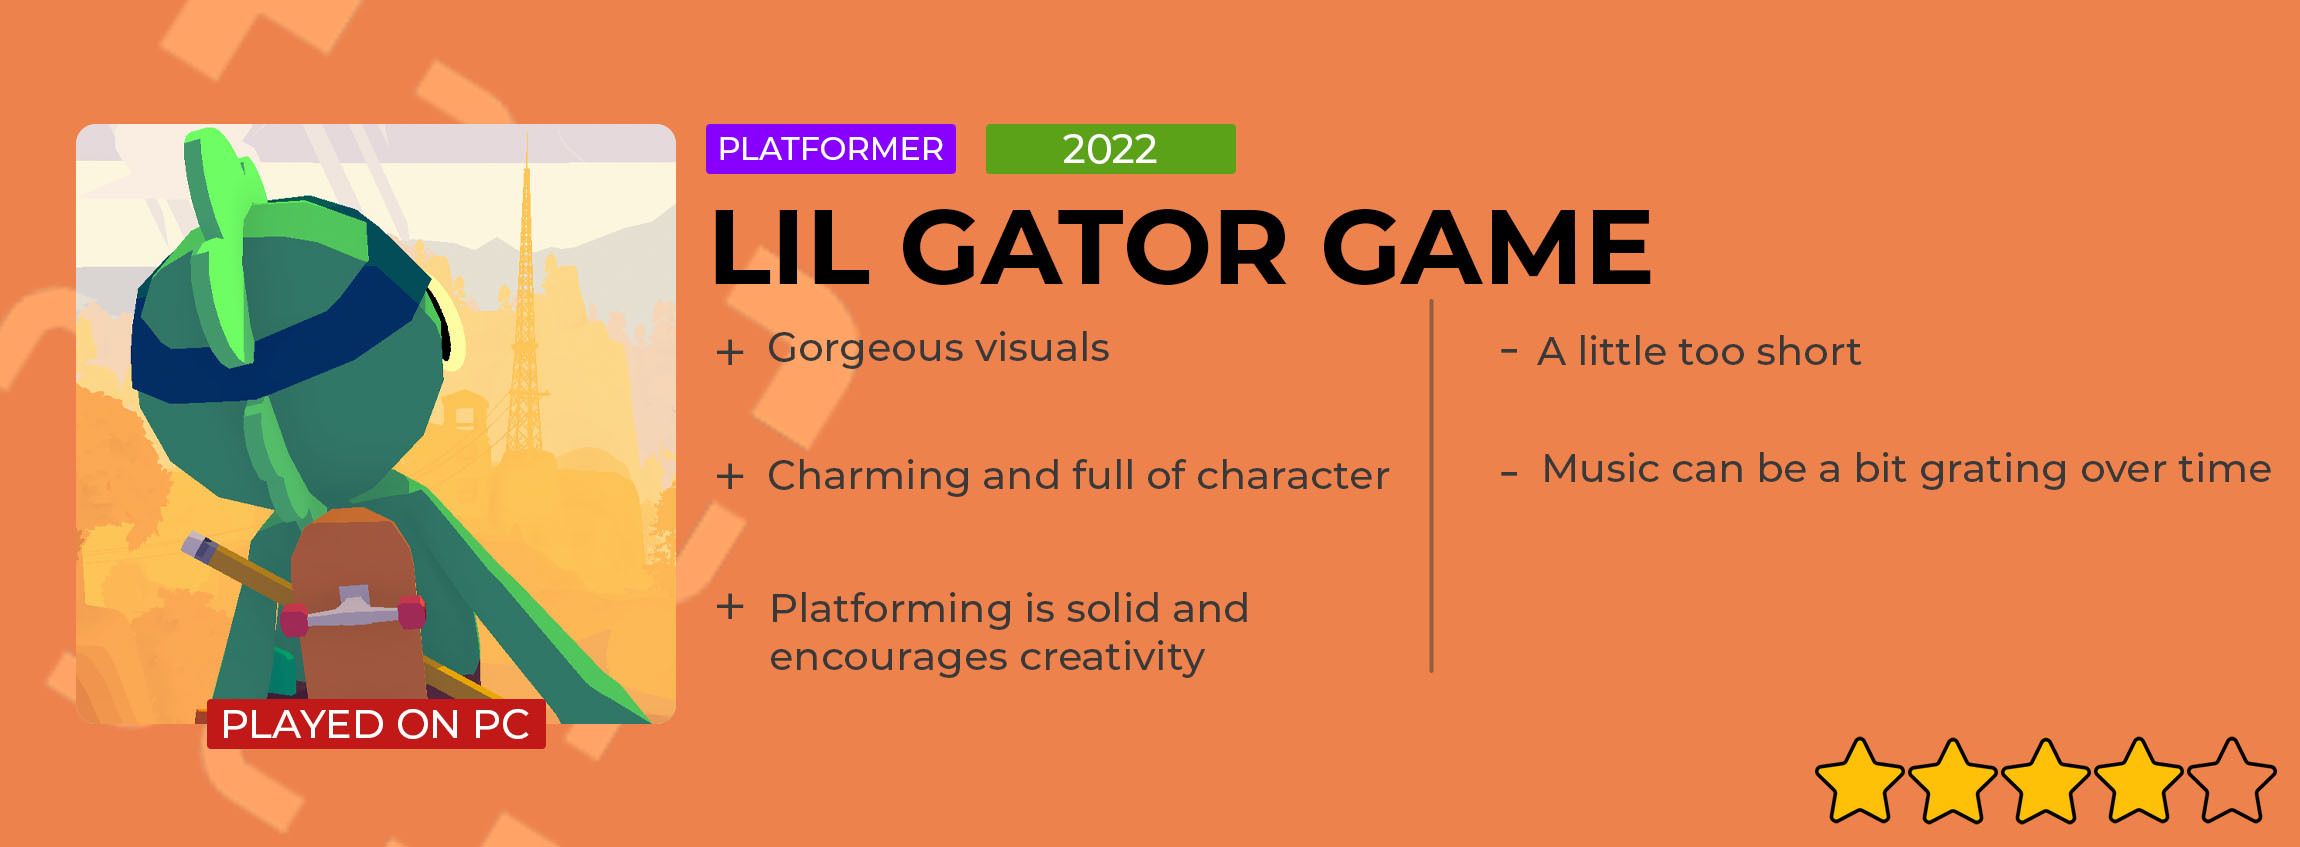 Lil Gator Game review card.